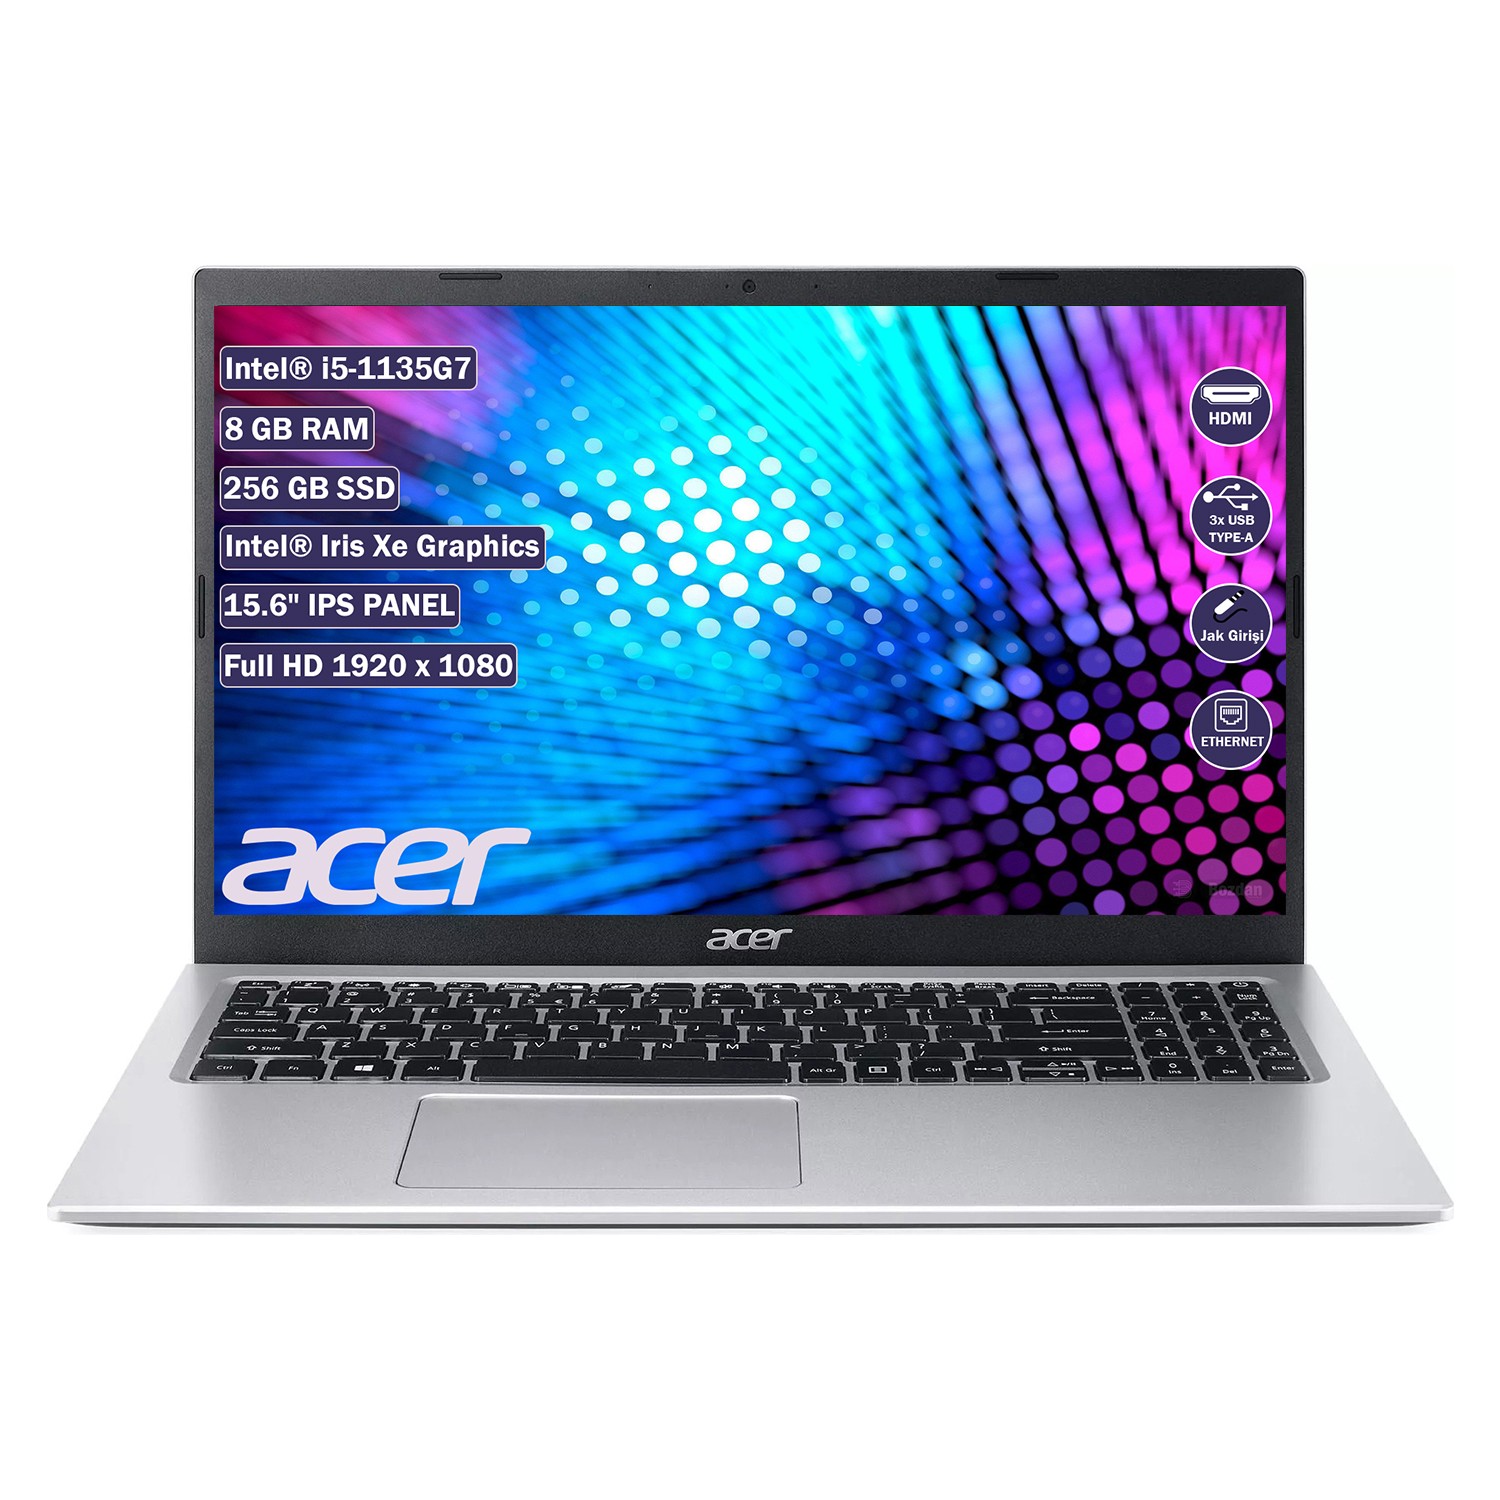 Acer%20Aspire%203%20A315-58%20Intel%20Core%20i5-1135G7%208%20GB%20256%20GB%20Nvme%20SSD%20Freedos%2015,6’’%20FHD%20Notebook